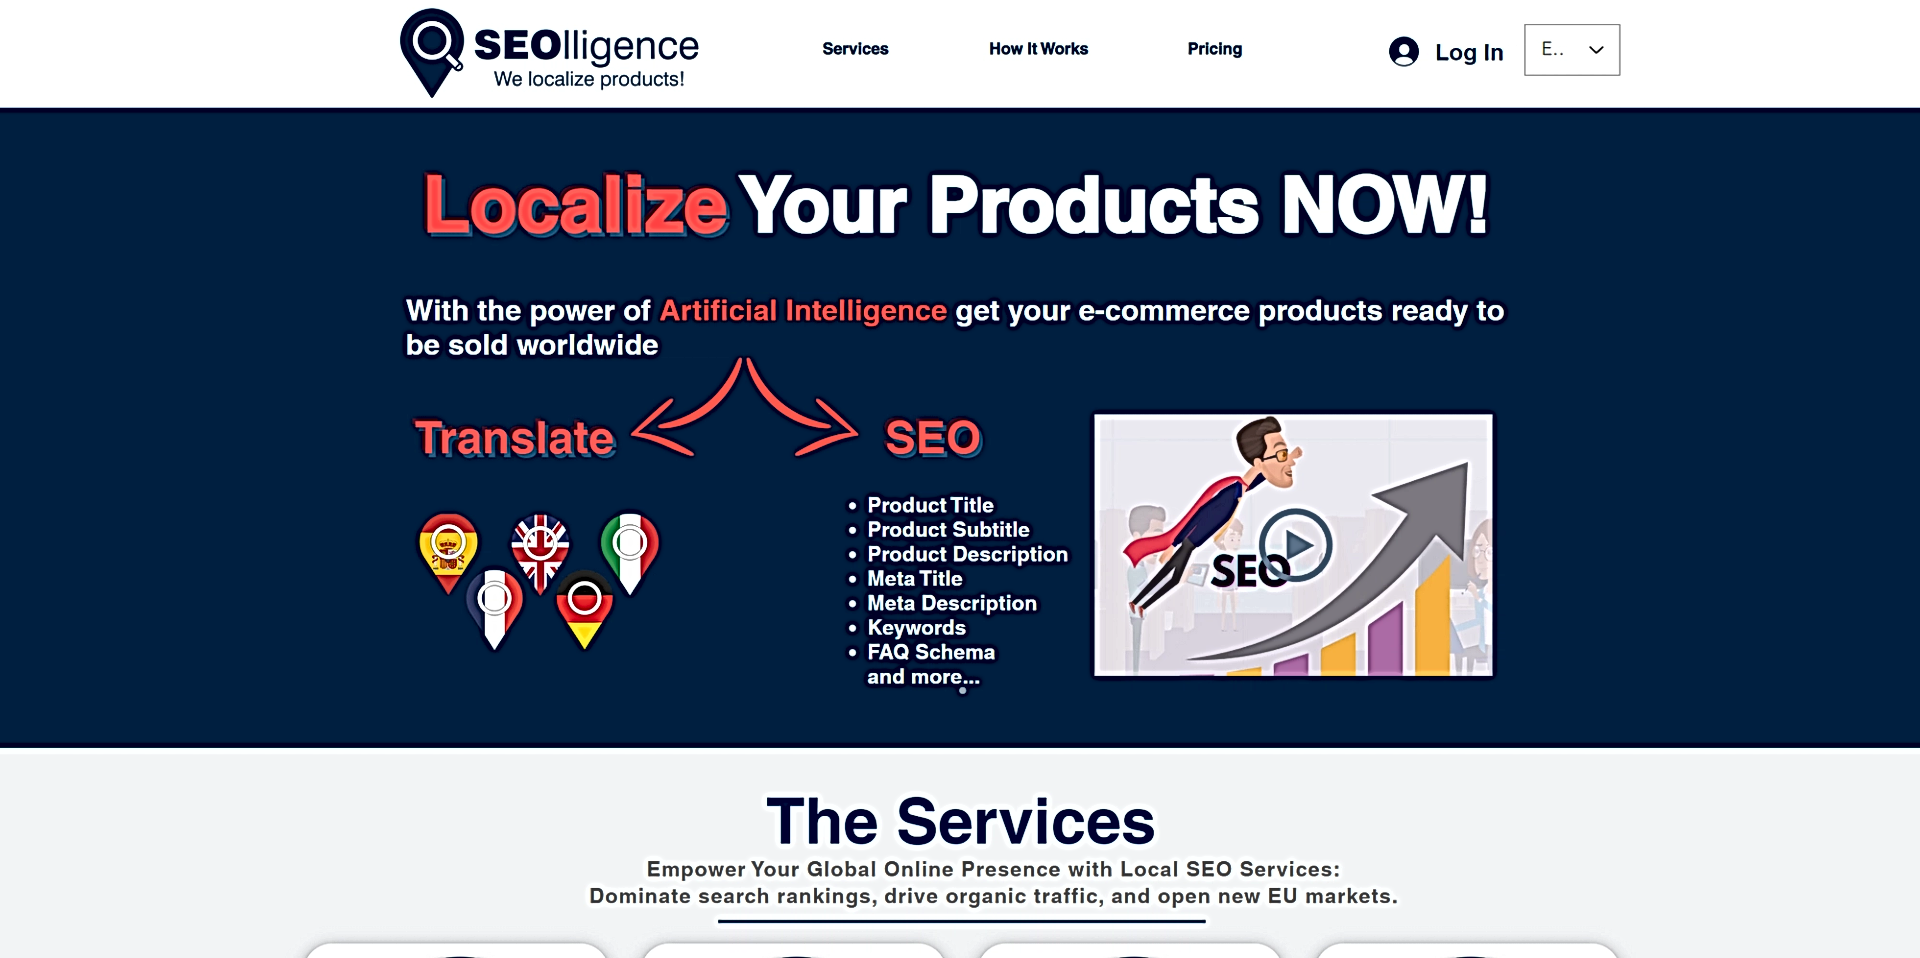 SEOlligence featured